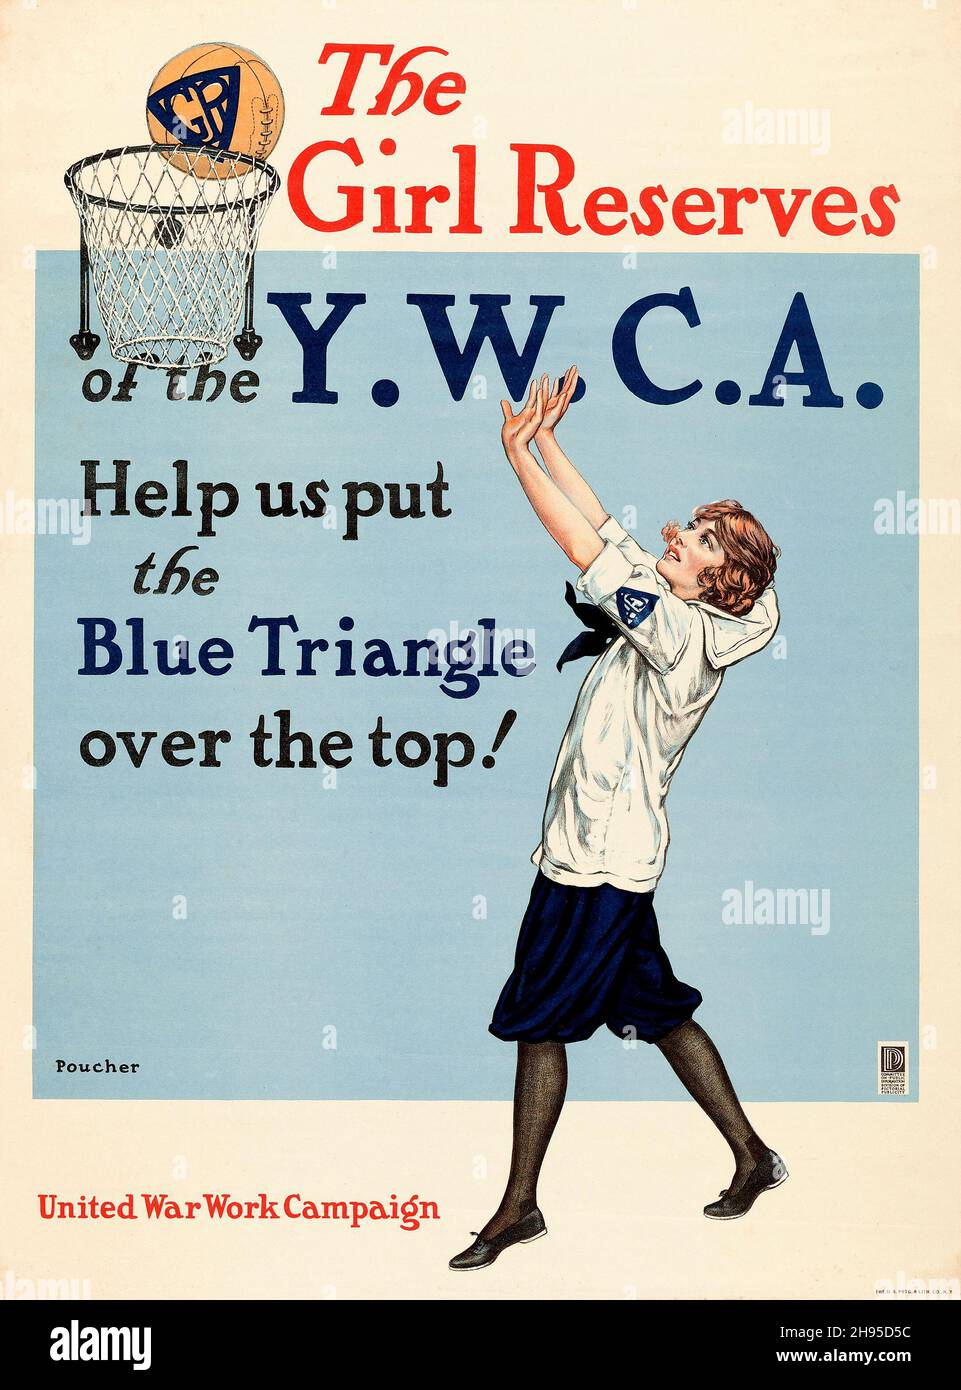 World War I Propaganda (Y.M.C.A., 1918). United War Work Campaign Poster - 'The Girl Reserves' Edward Poucher Art. Girl throwing ball at basket. Stock Photo